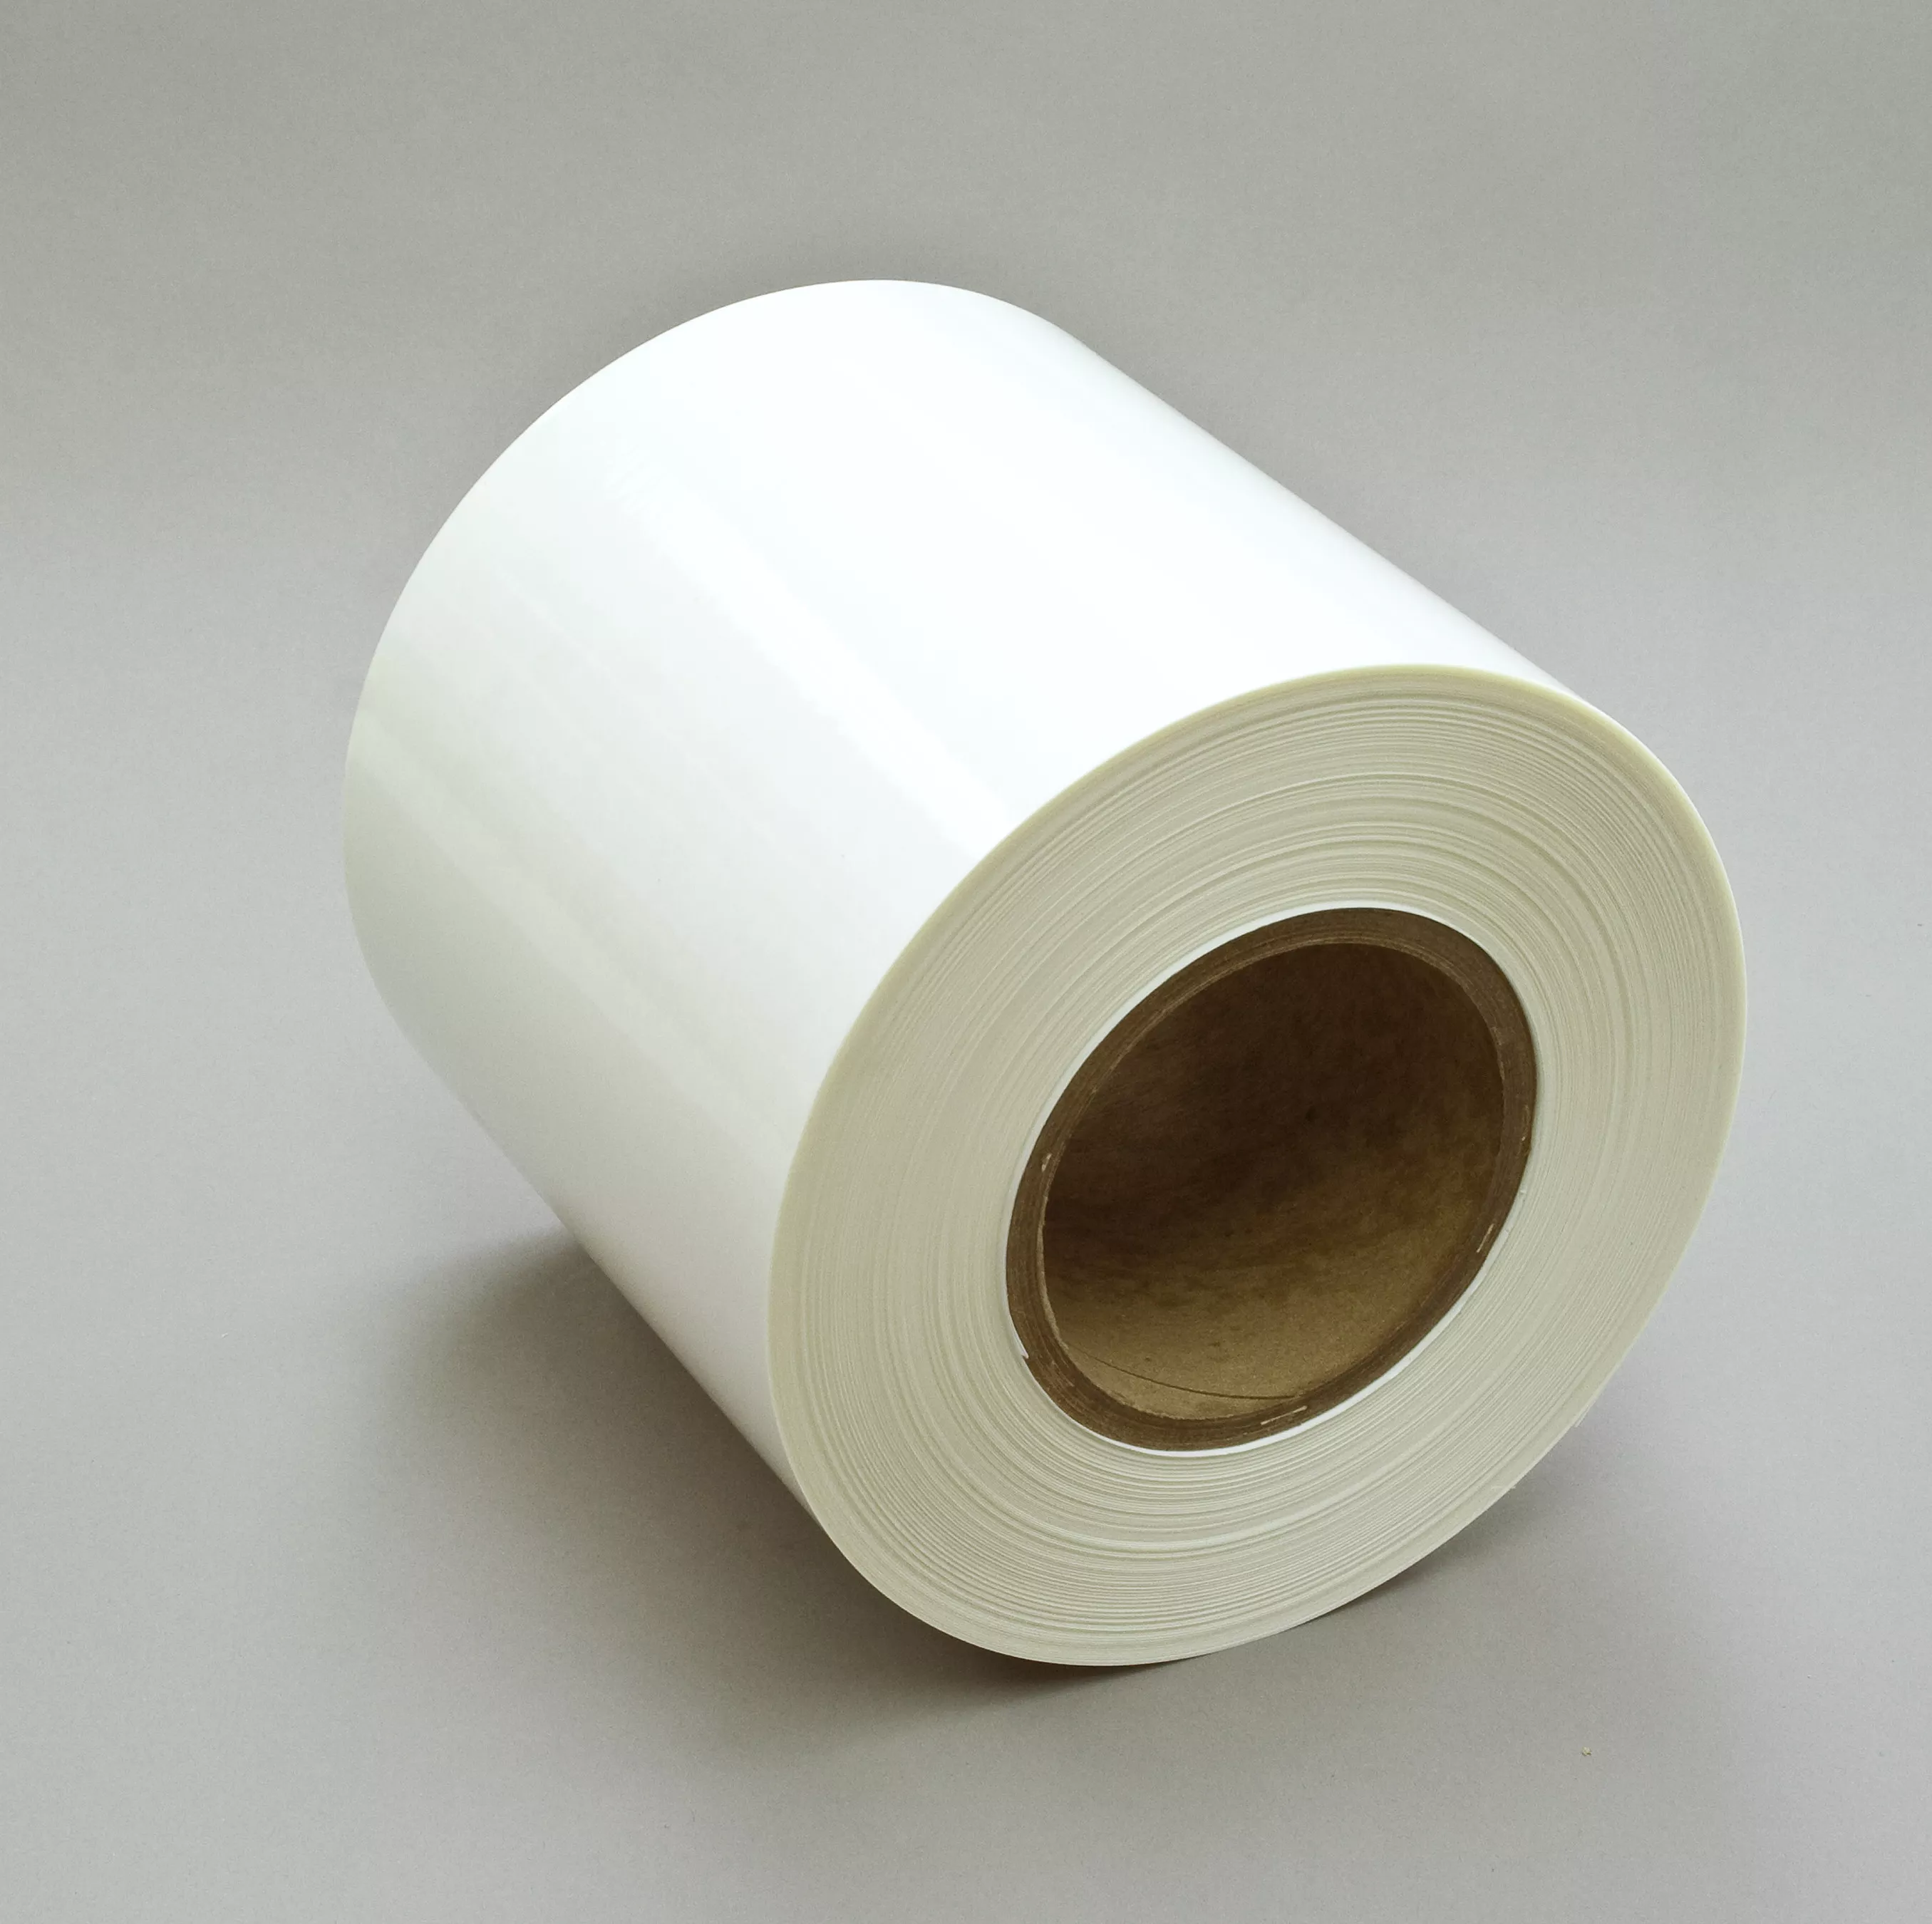 3M™ Removable Label Material FP0862, Clear Polypropylene, 6 in x 1668
ft, 1 Roll/Case